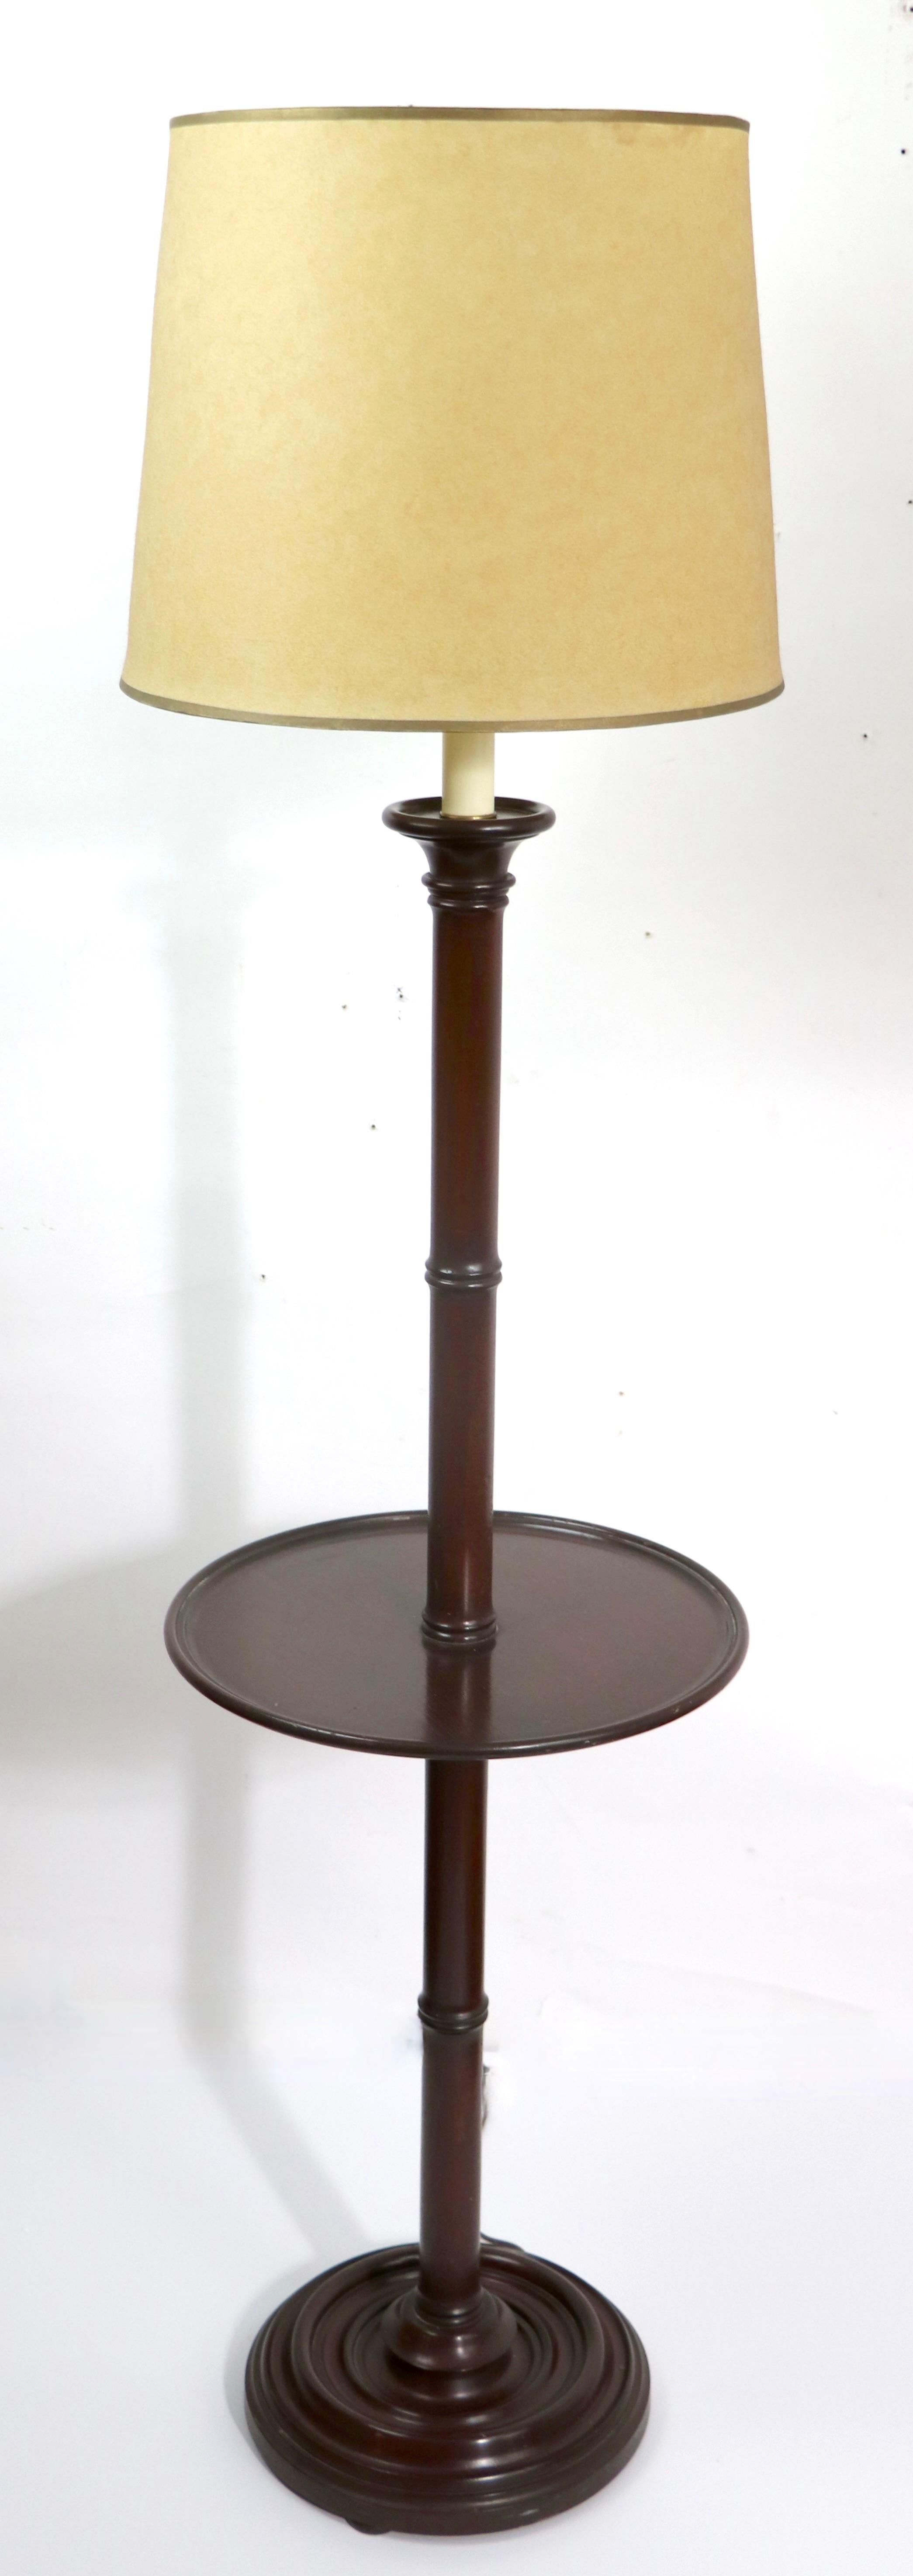 Regency Revival Pr.  Mahogany Floor Lamps with Table Surfaces